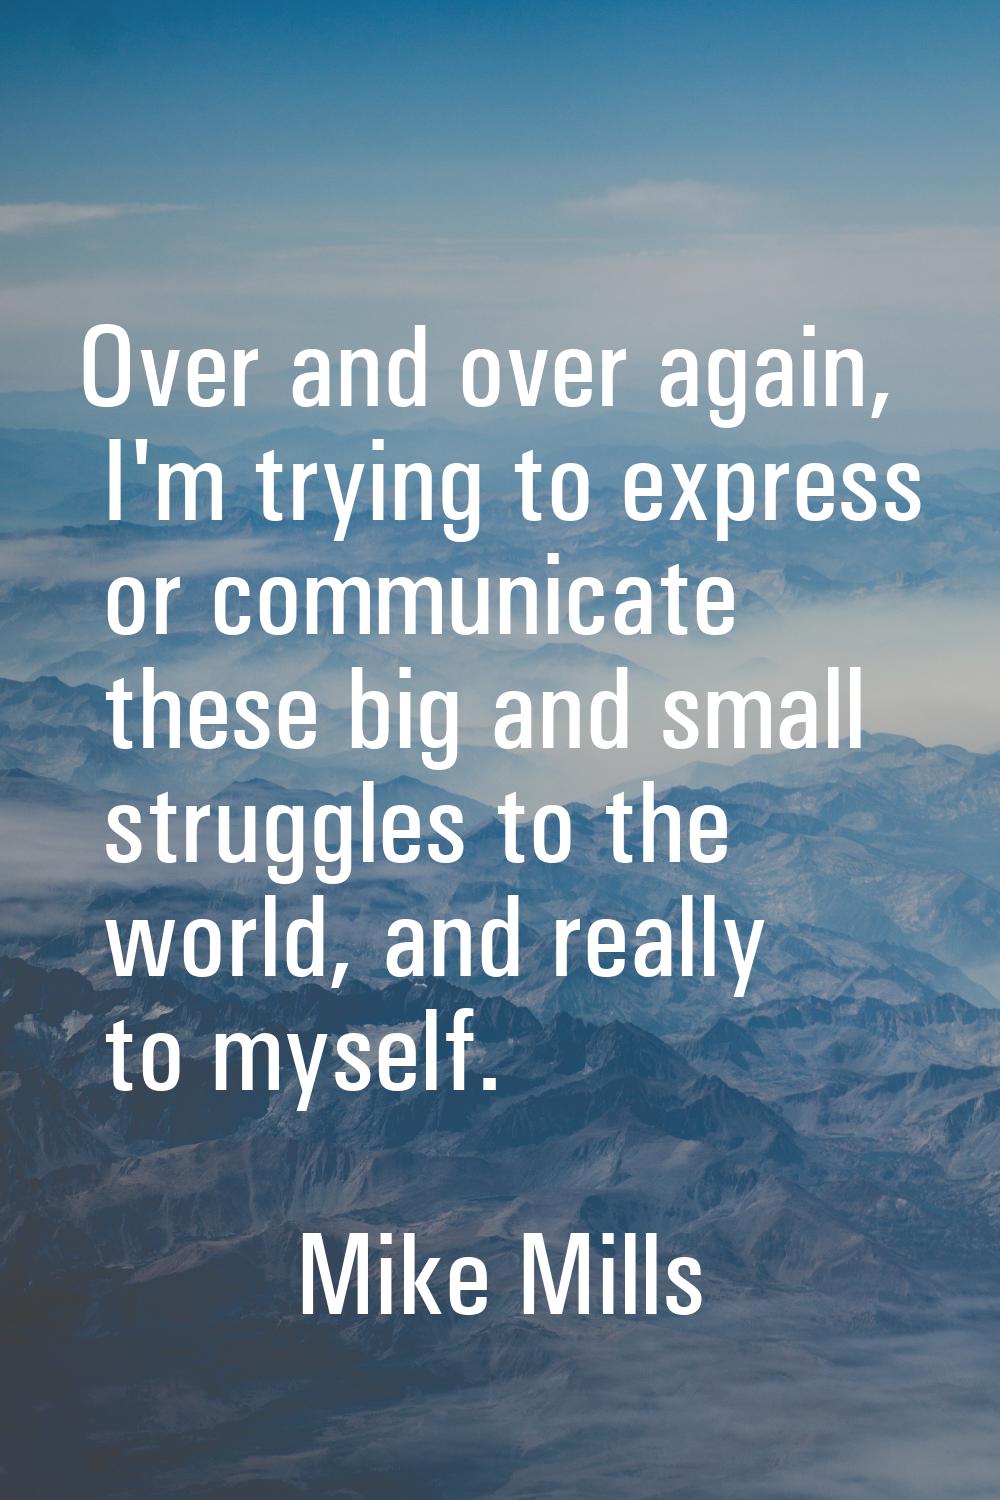 Over and over again, I'm trying to express or communicate these big and small struggles to the worl